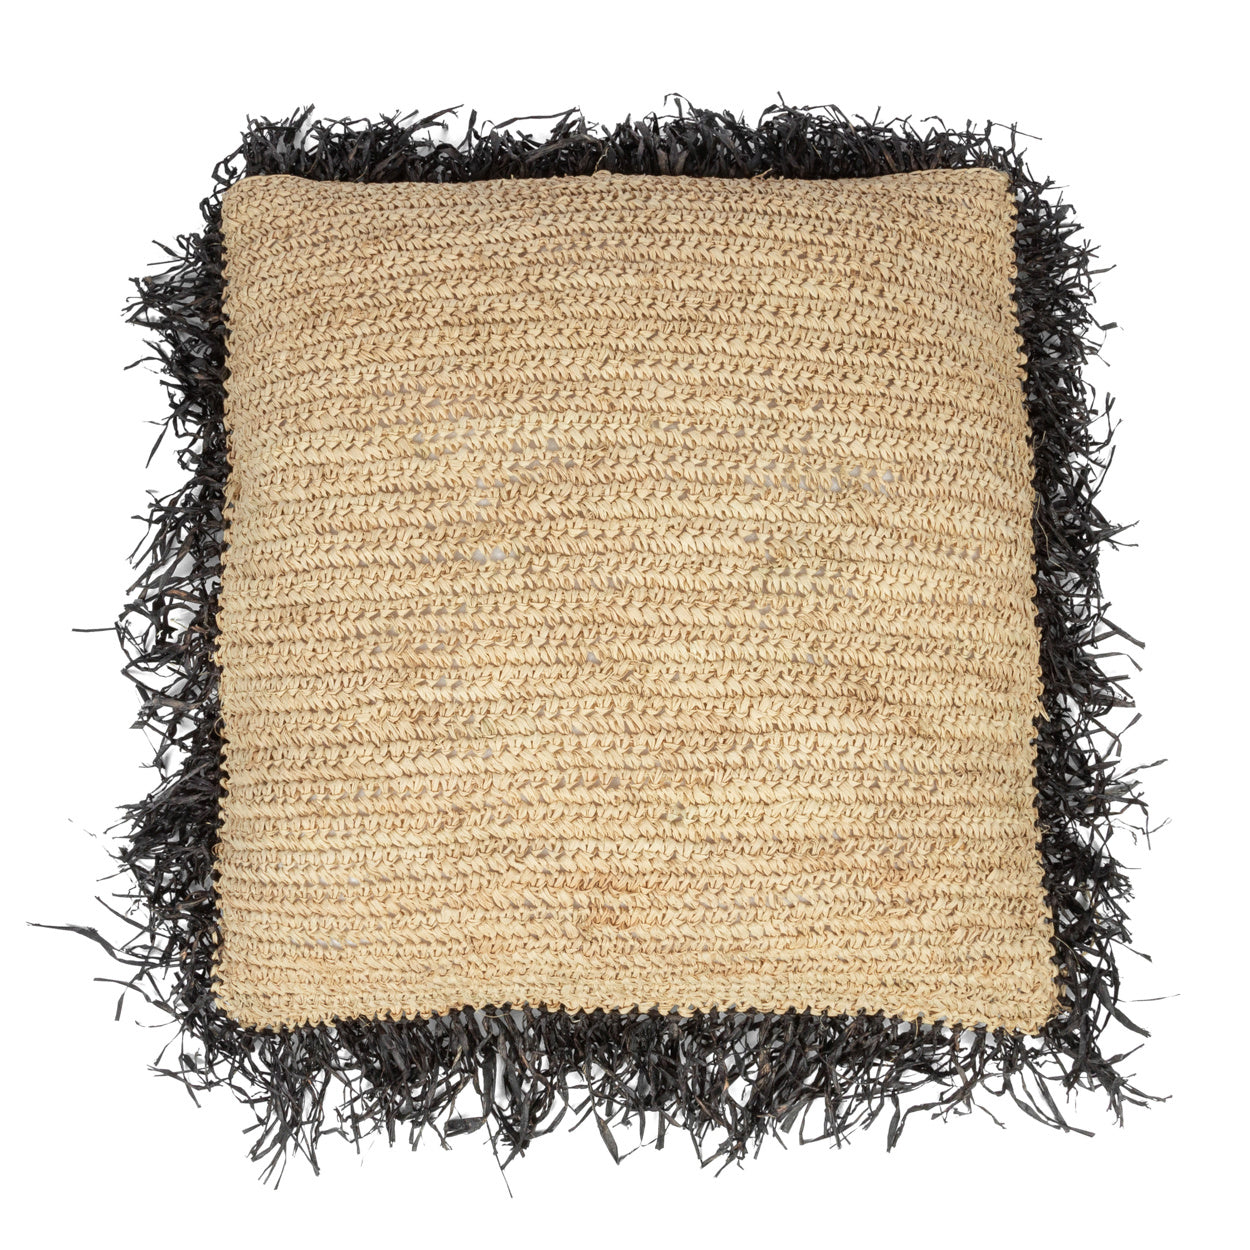 THE RAFFIA Cushion Cover large black-natural front view